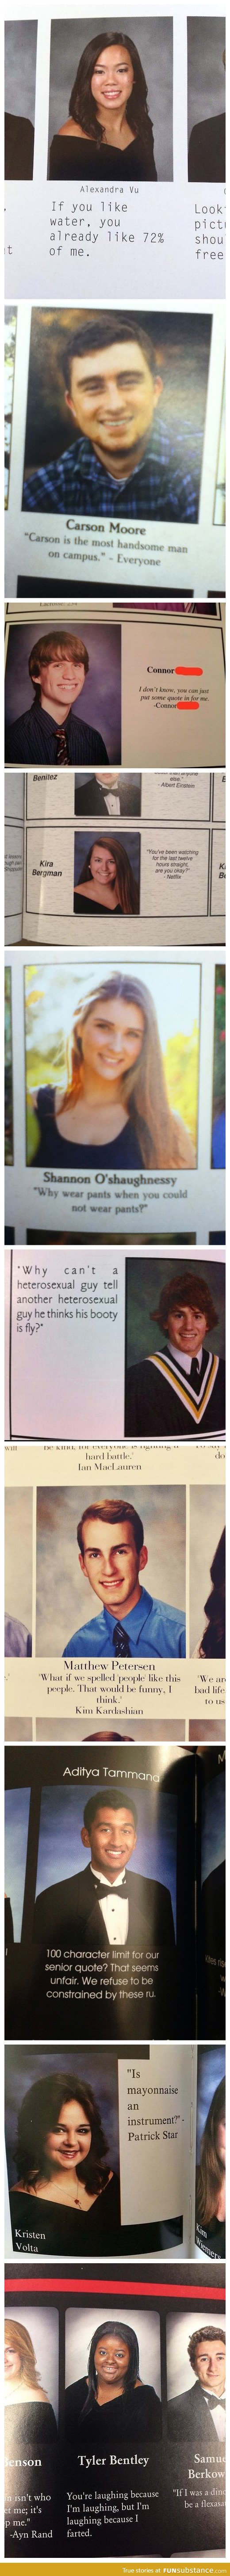 Some people are better at yearbook quotes than others...